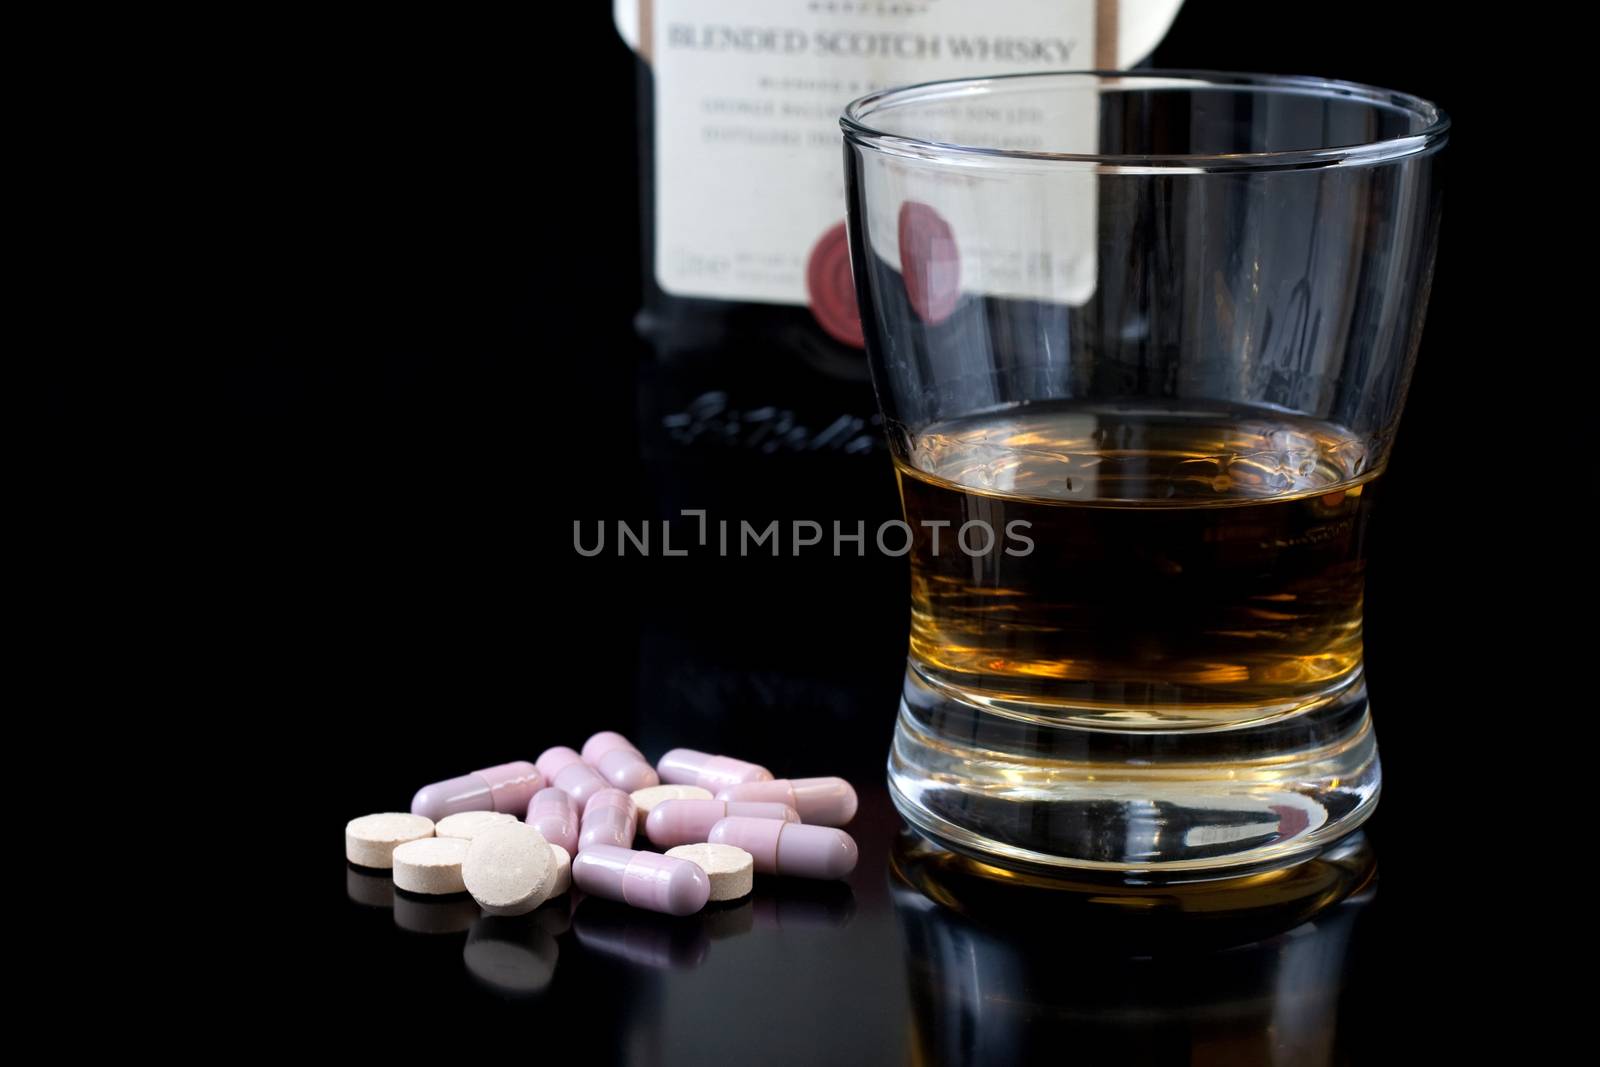 wiskey in a glass some pills and the bottle behind on black background